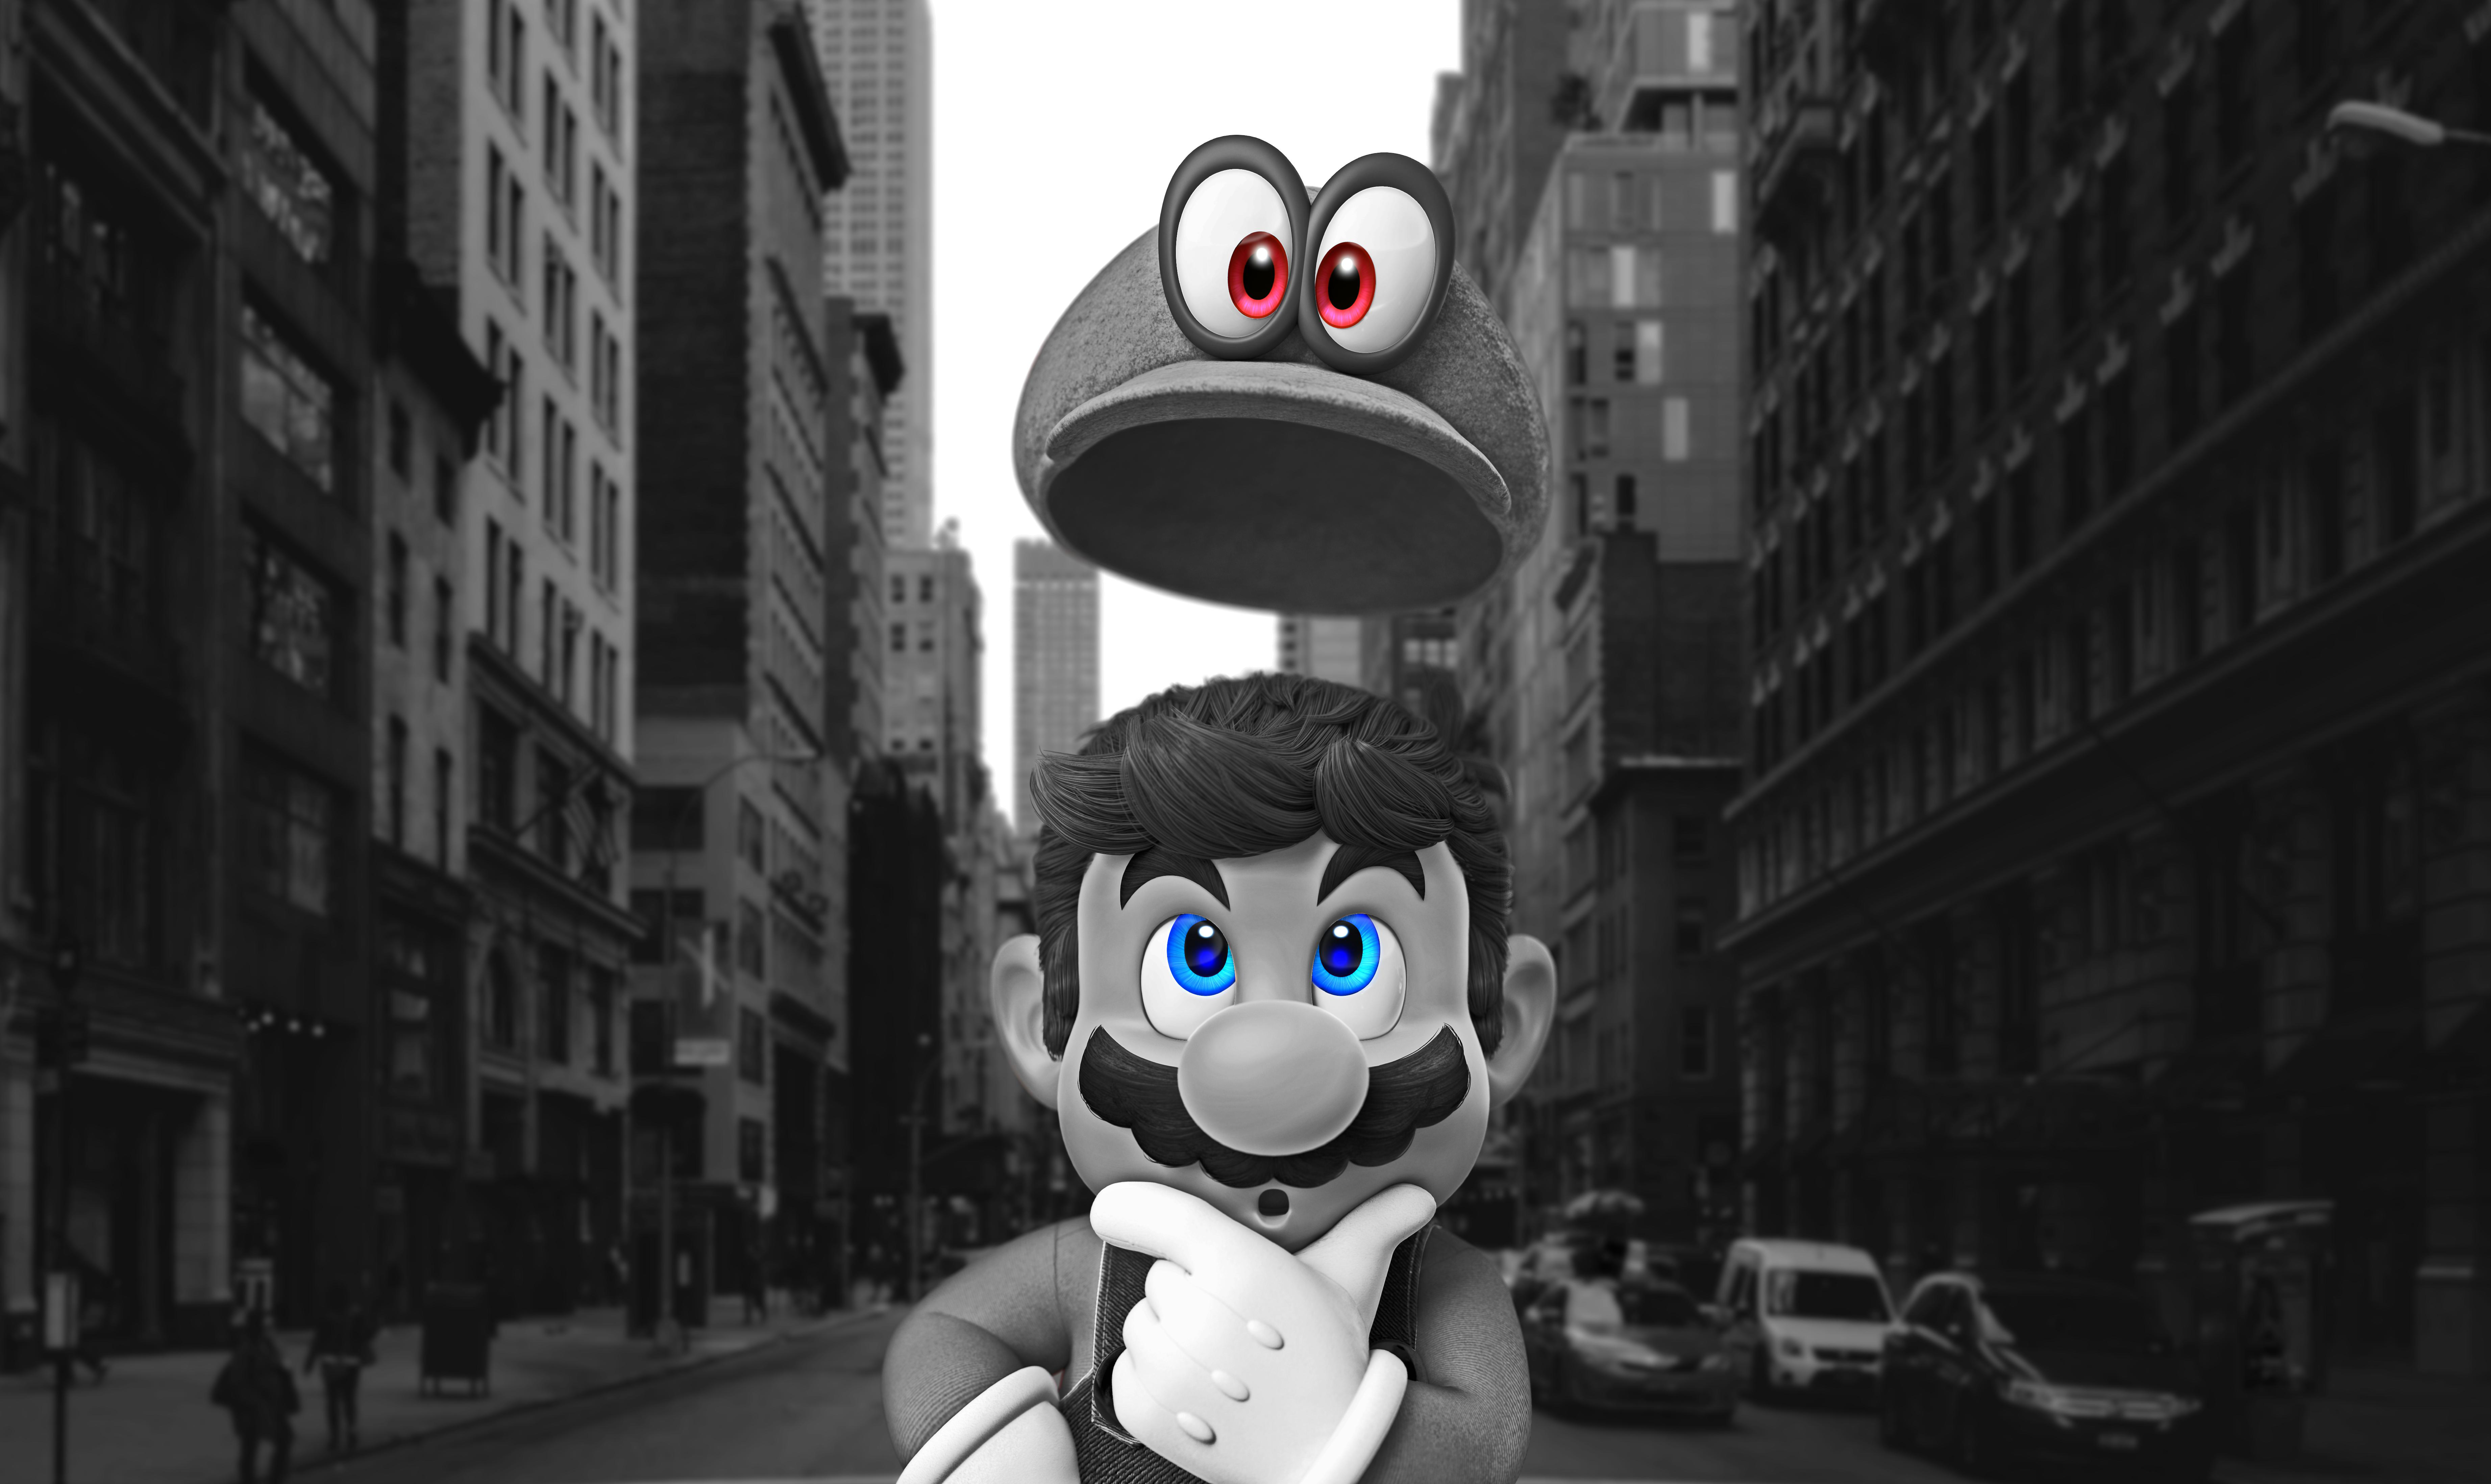 Video Game Super Mario Odyssey HD Wallpaper | Background Image